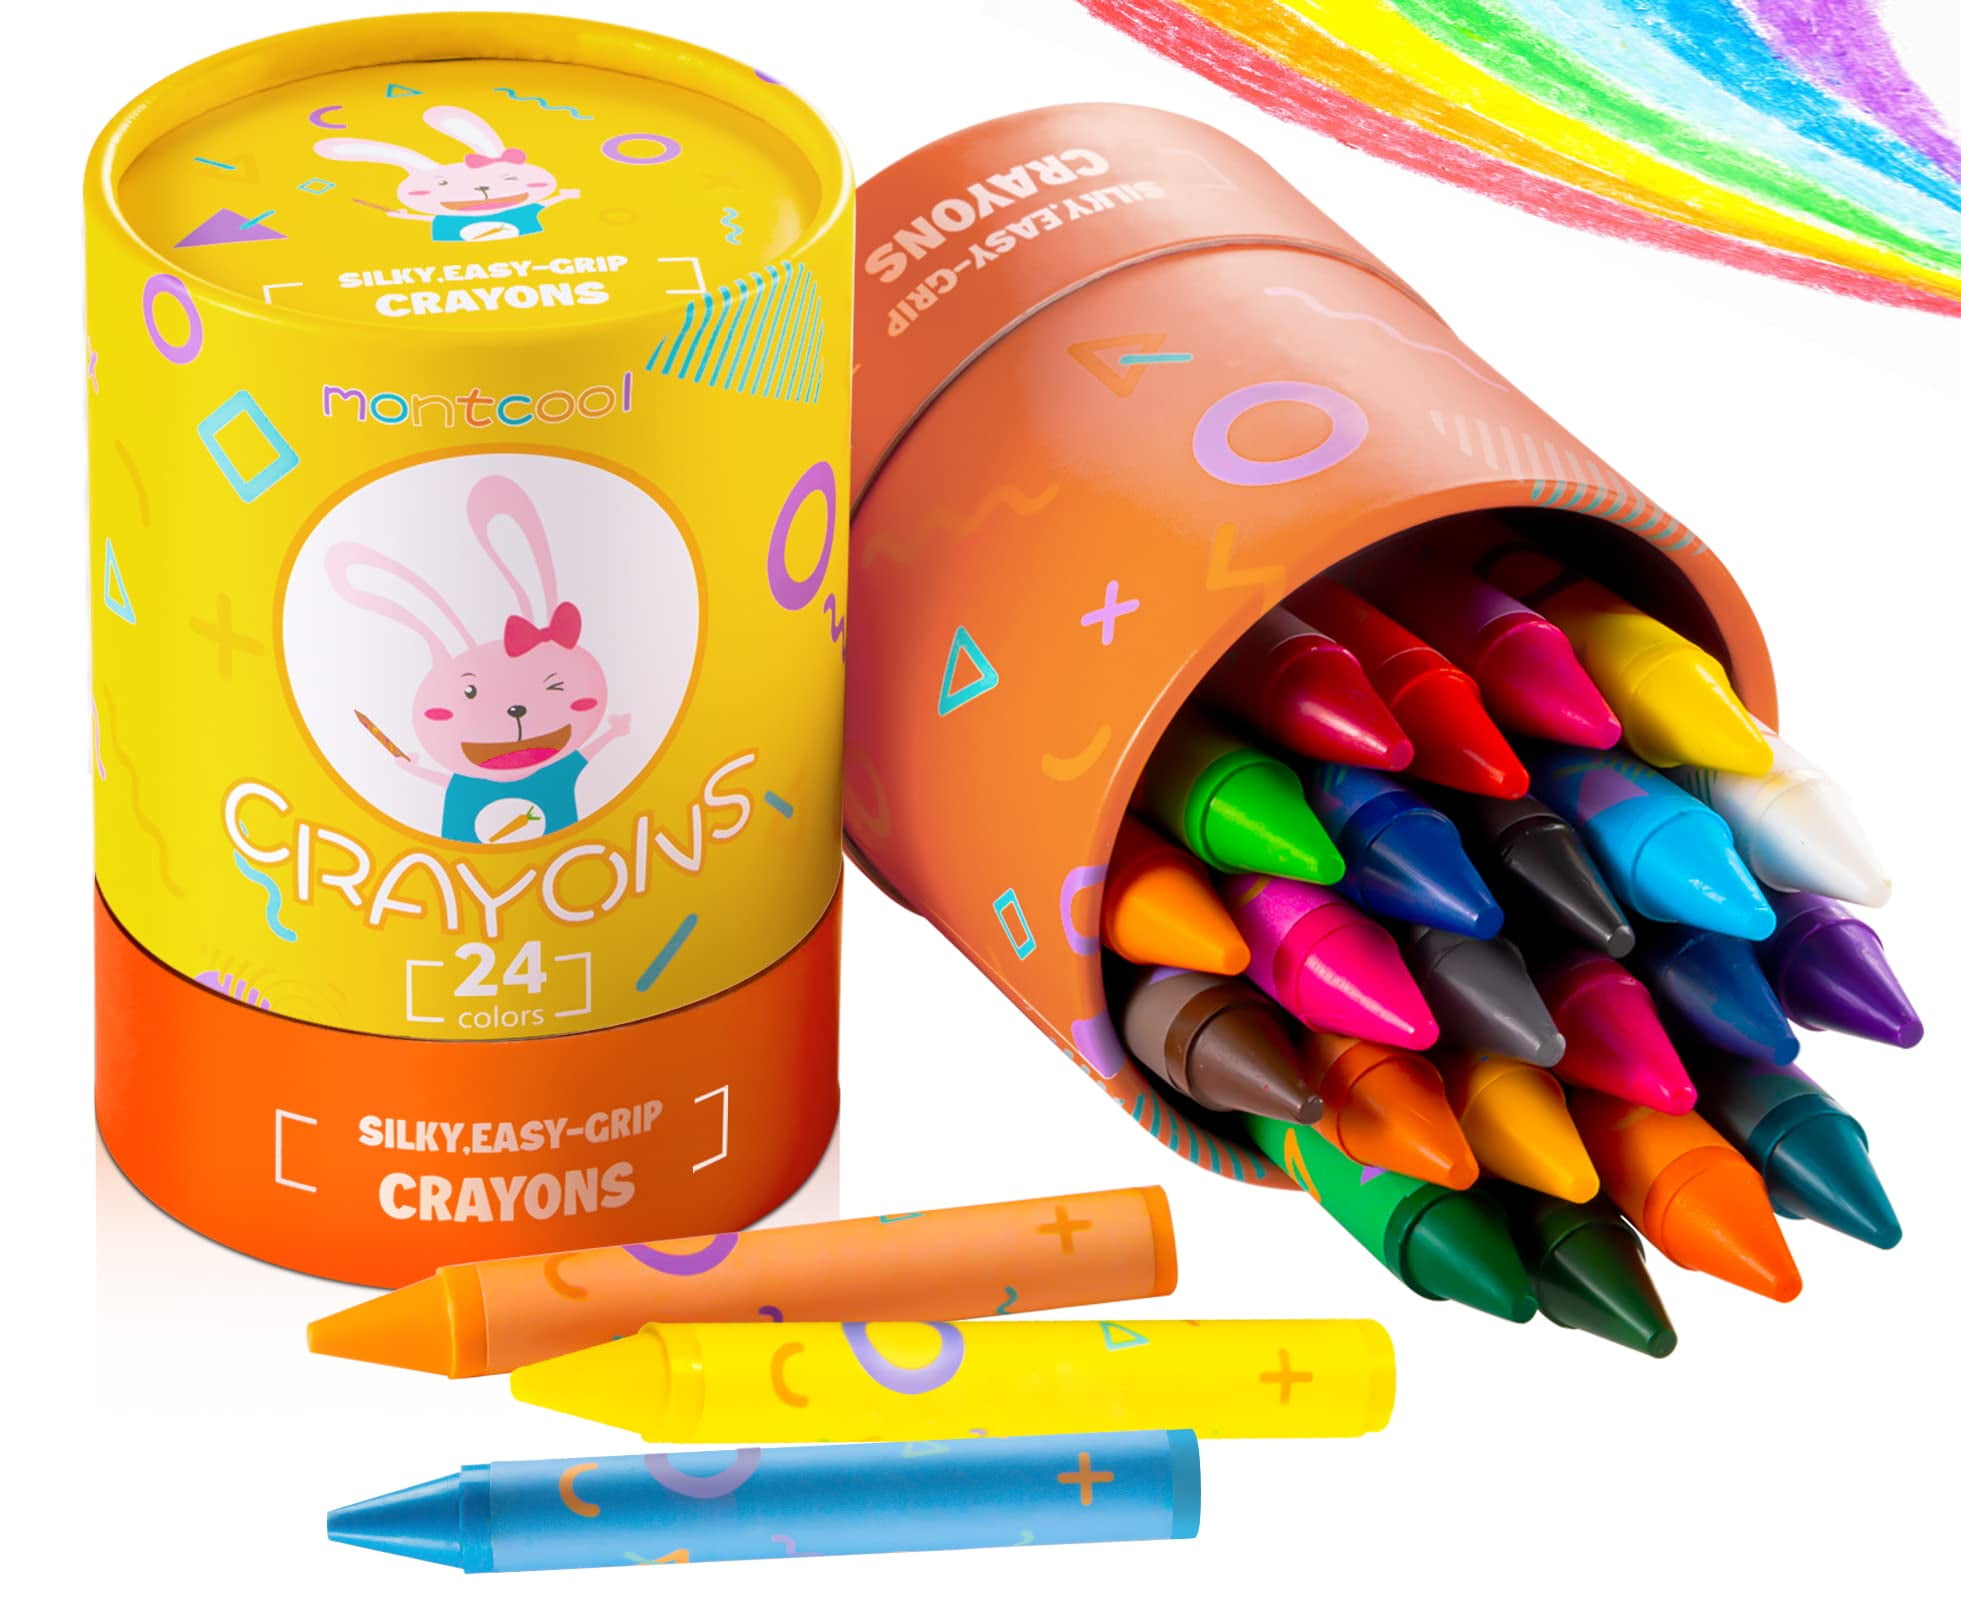 Huneebo Washable Silky Crayons for Toddlers, 24 Colors Non Toxic